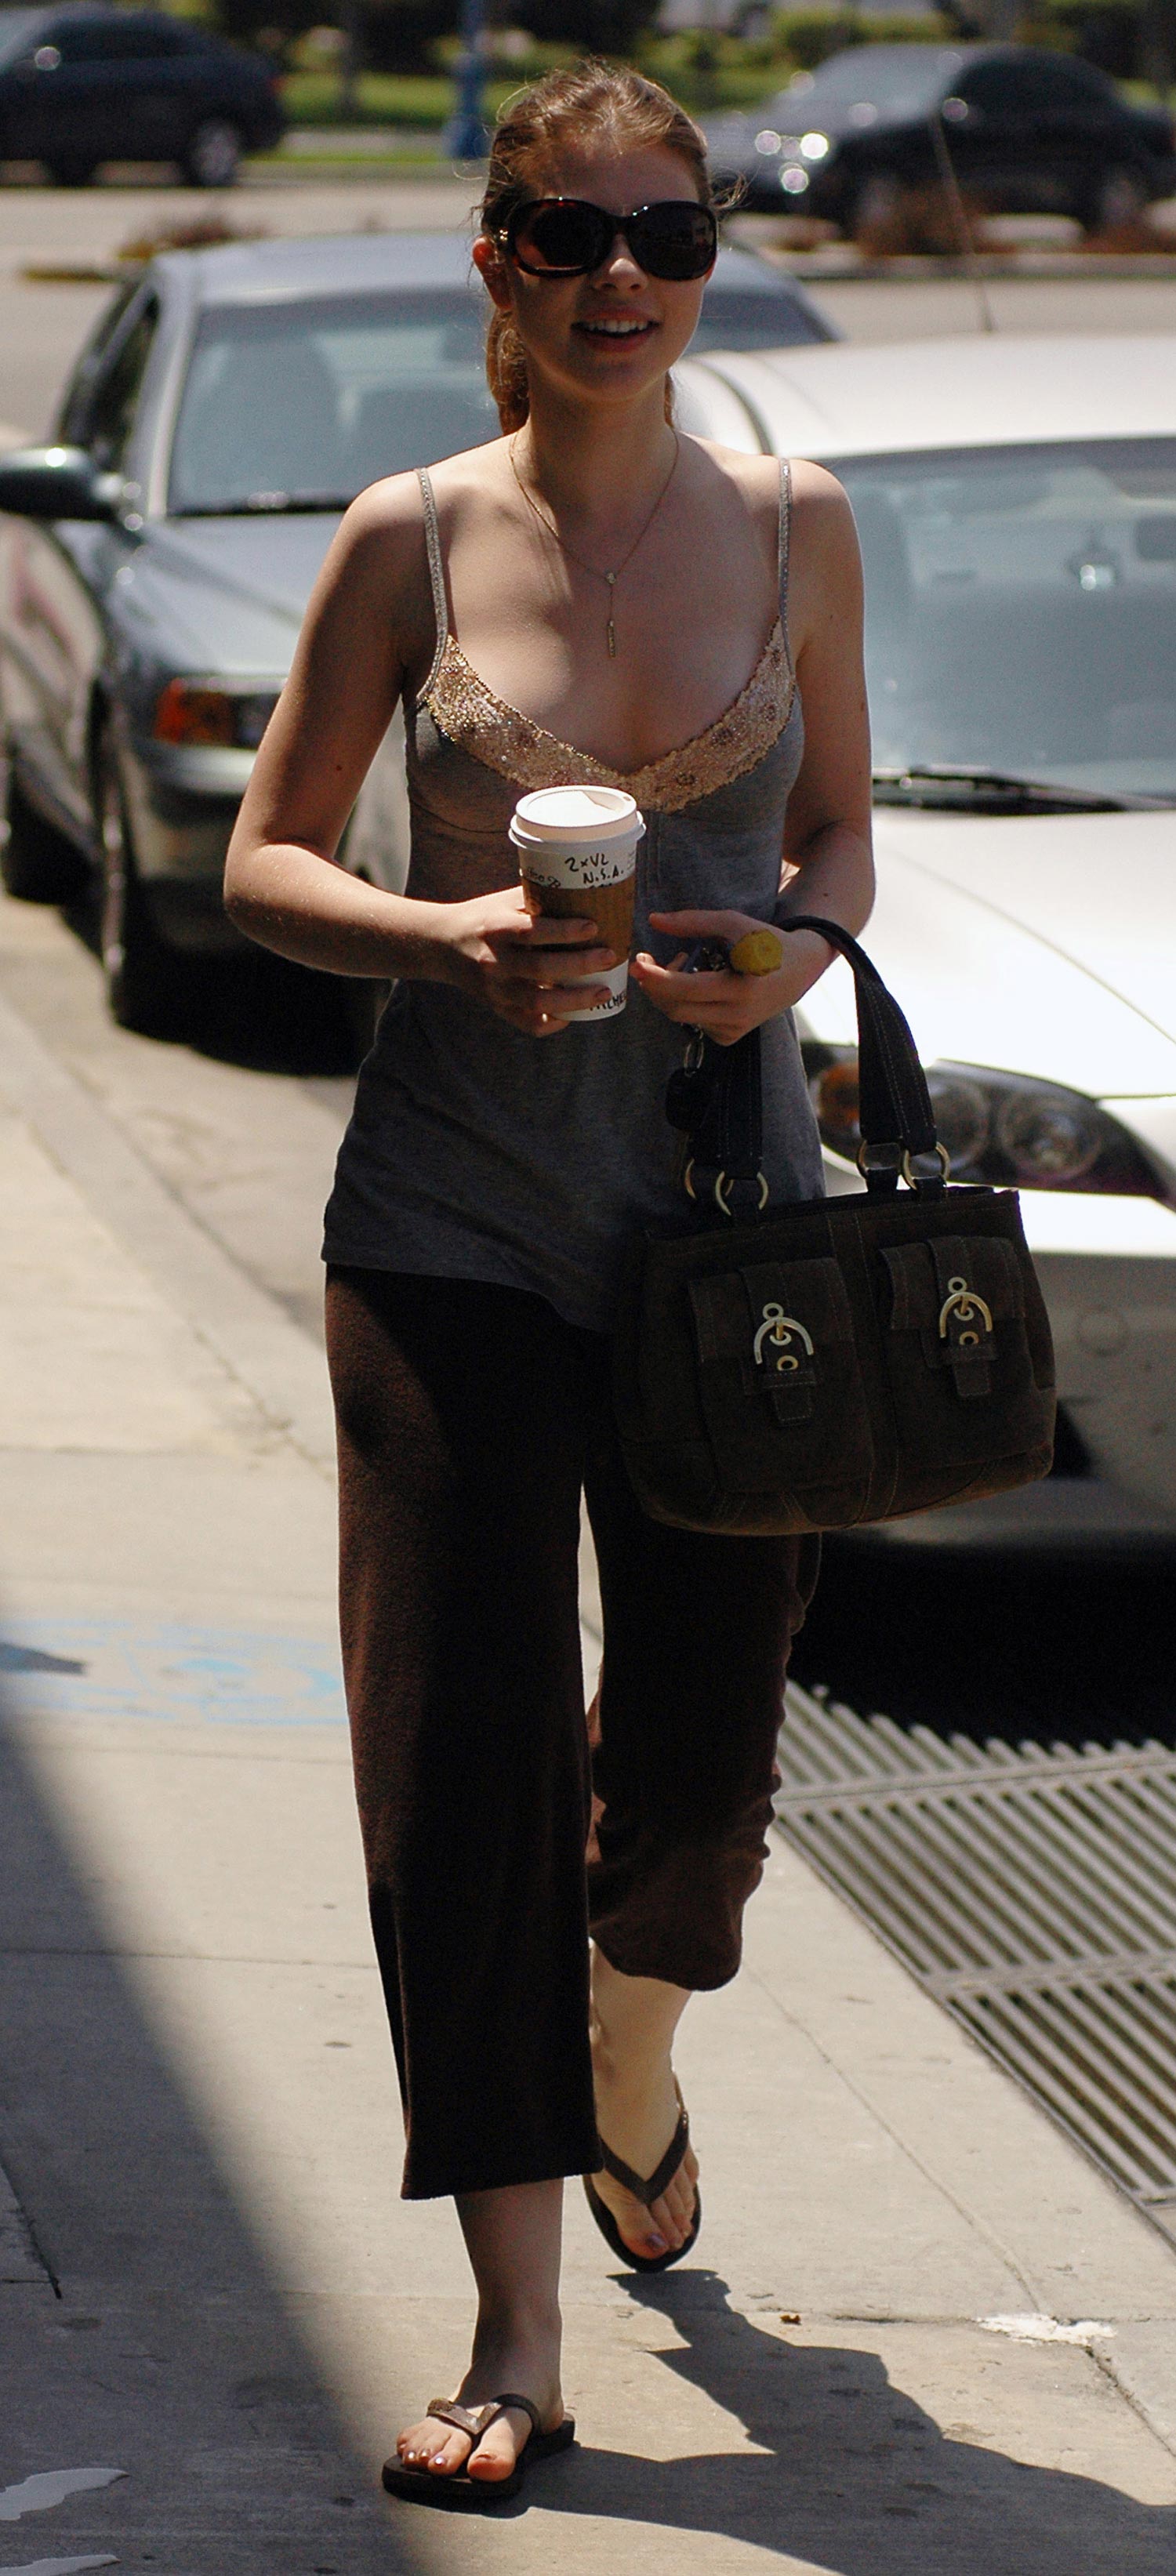 michelle-trachtenberg-out-and-about-august-2005-hq-03-1500.jpg